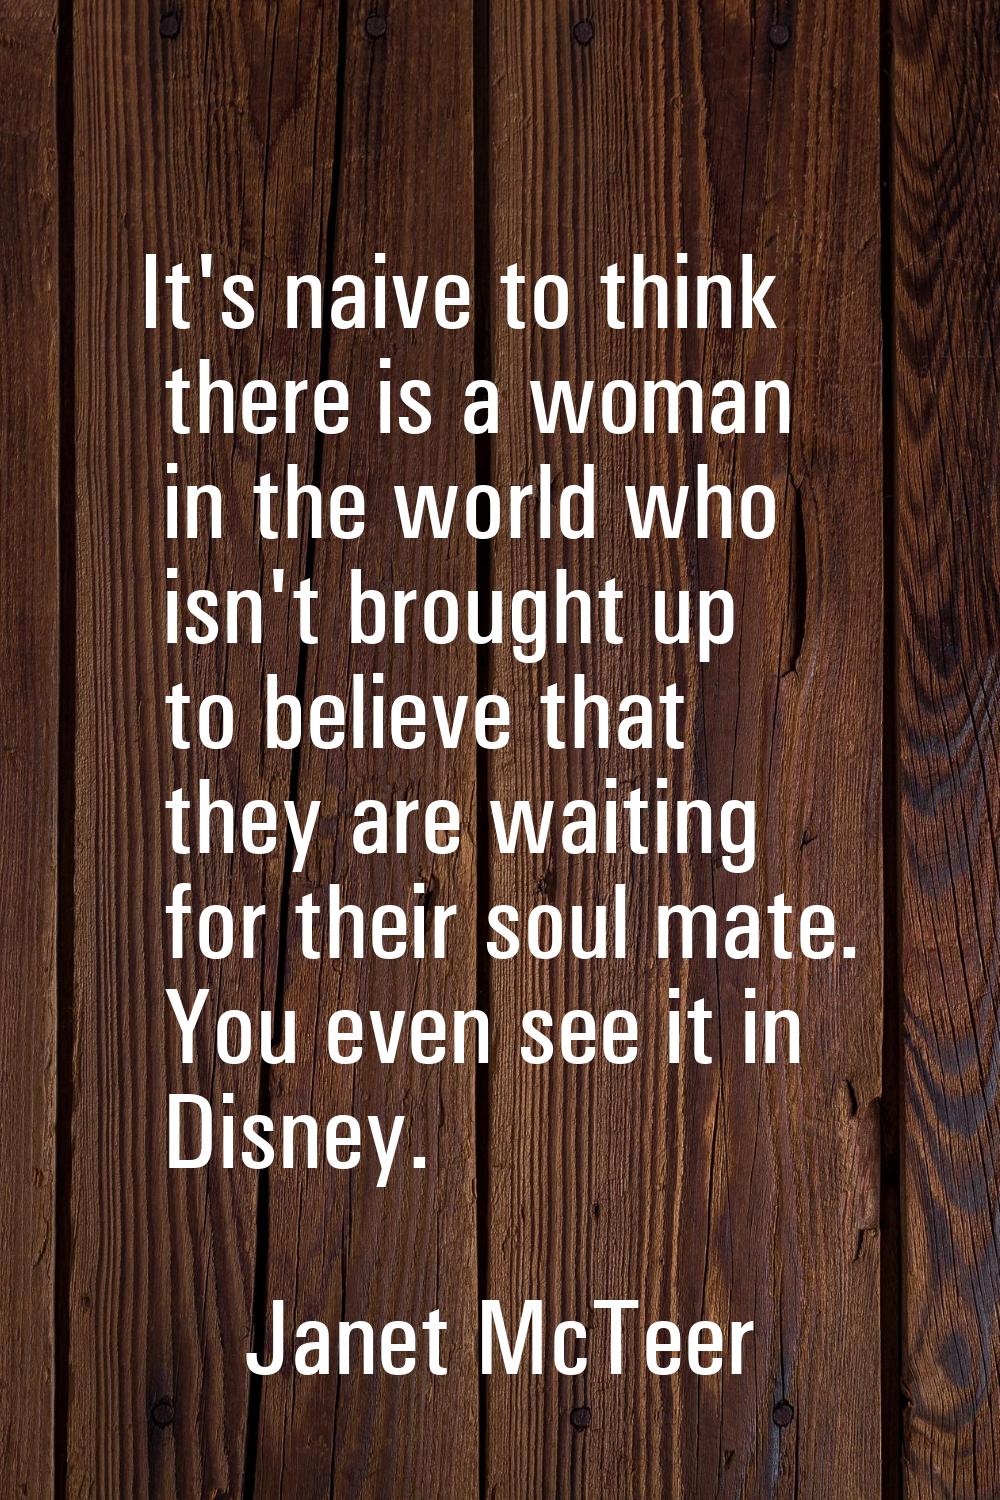 It's naive to think there is a woman in the world who isn't brought up to believe that they are wai